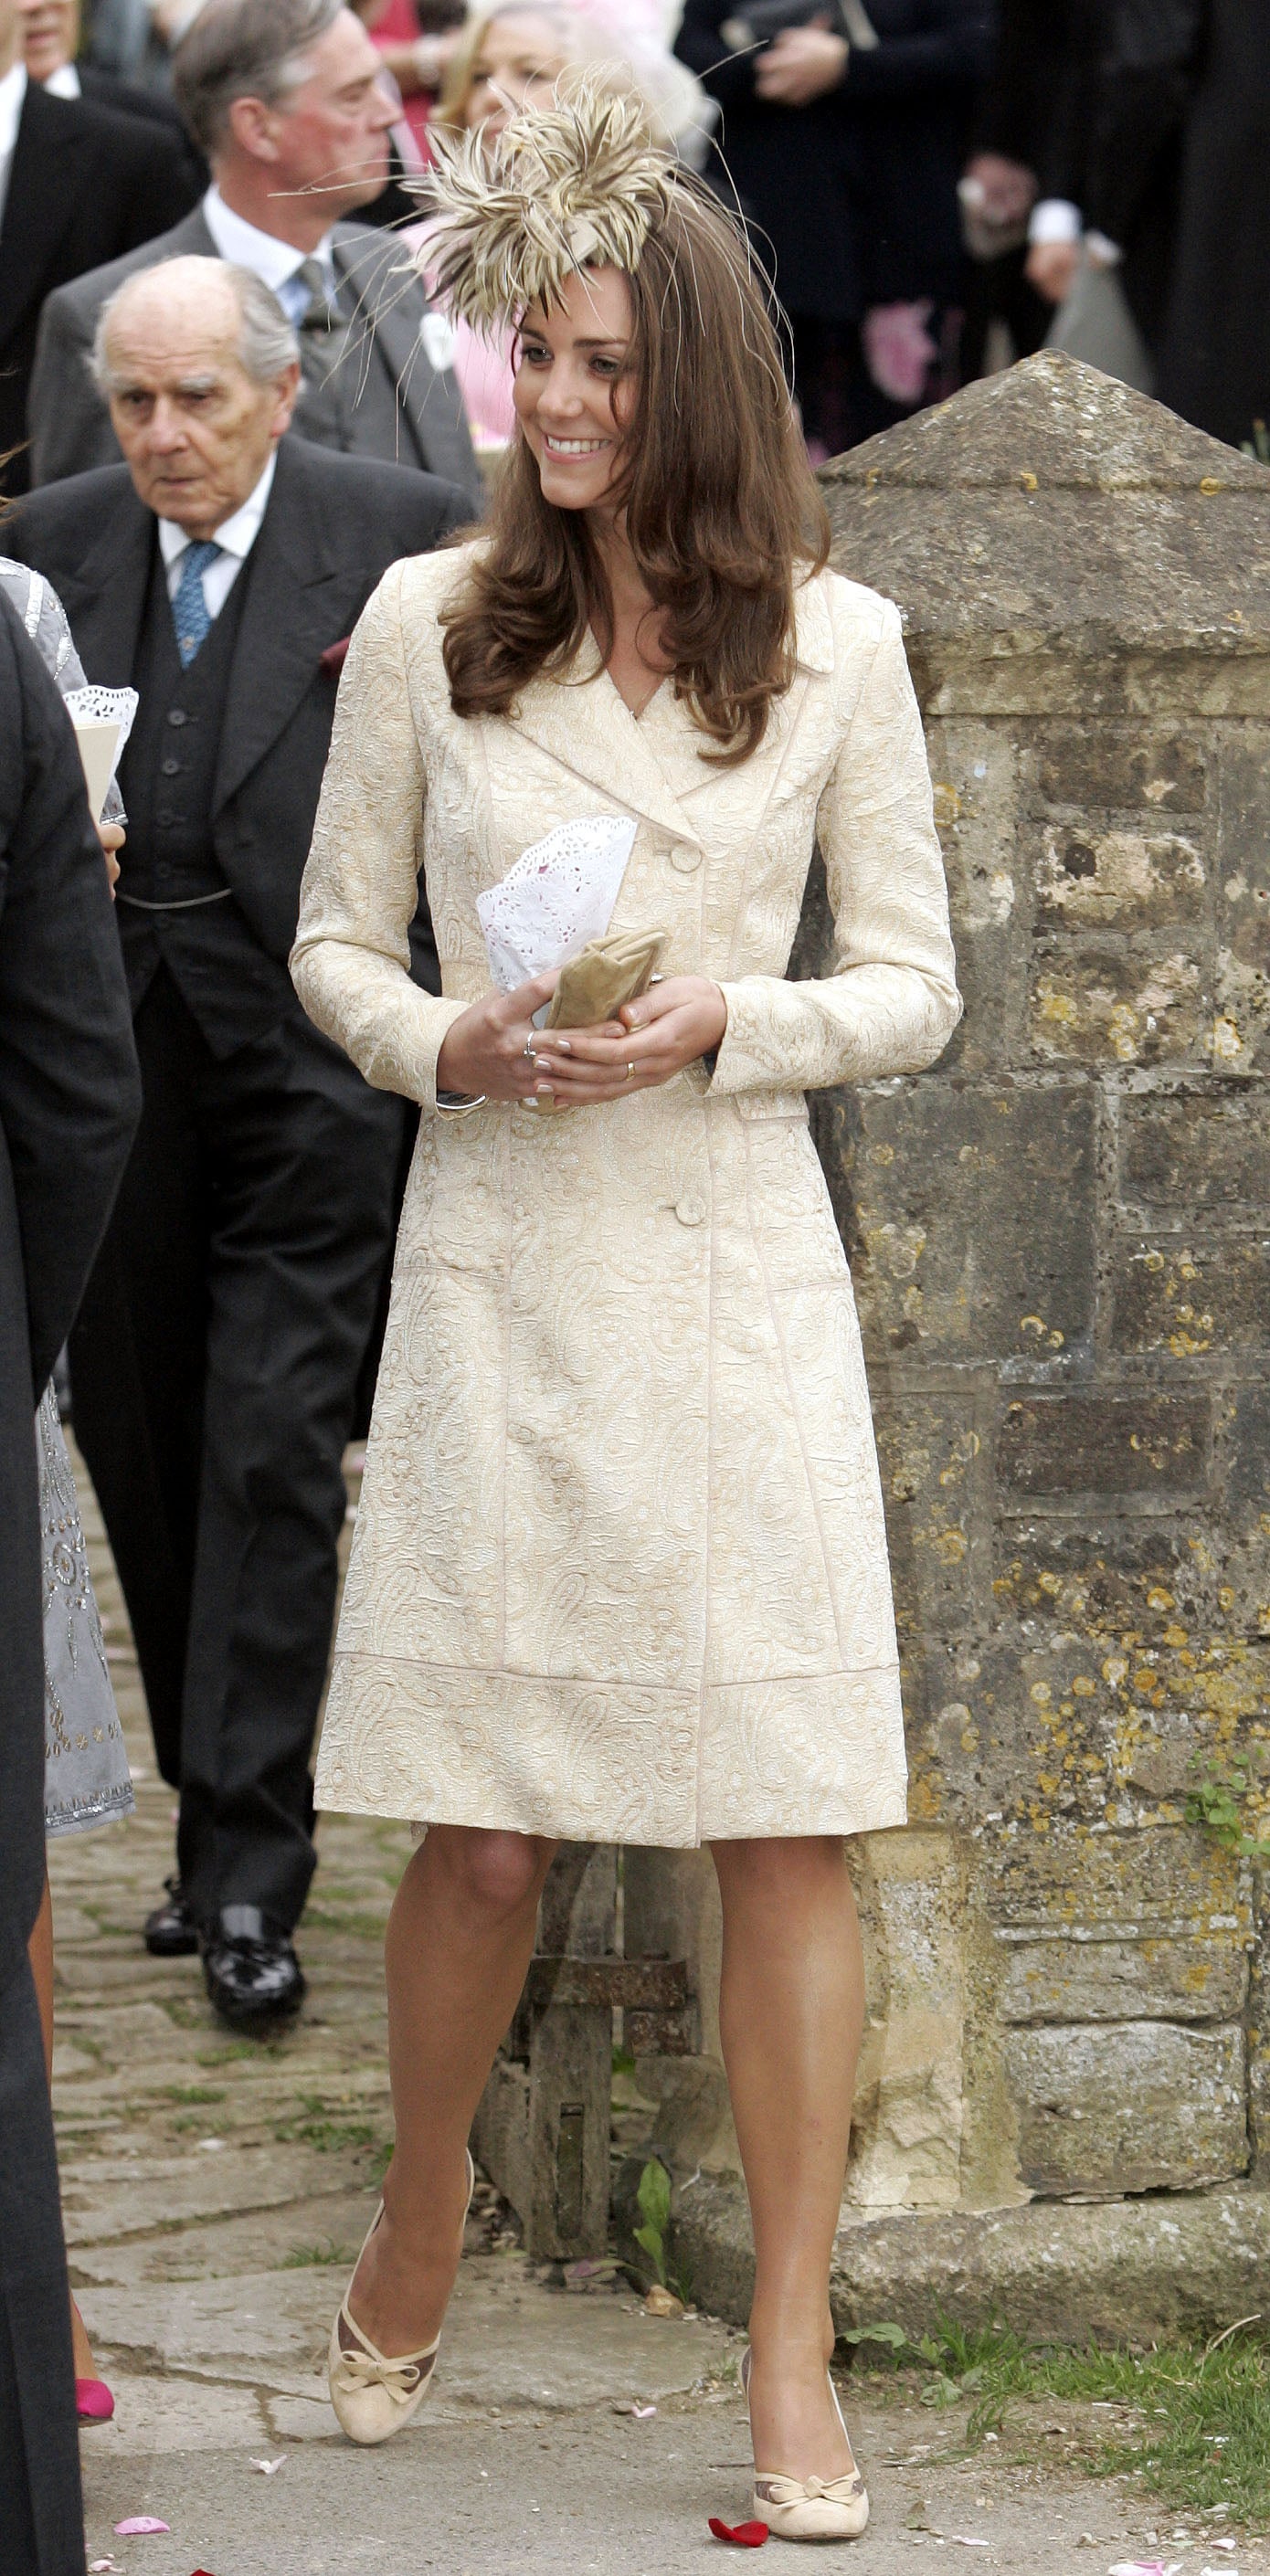 Laura Parker-Bowles and Harry Lopes Wedding, May 2006 | Kate Middleton Was the Belle of the Ball at Every Wedding She's Ever Attended | POPSUGAR Fashion 5